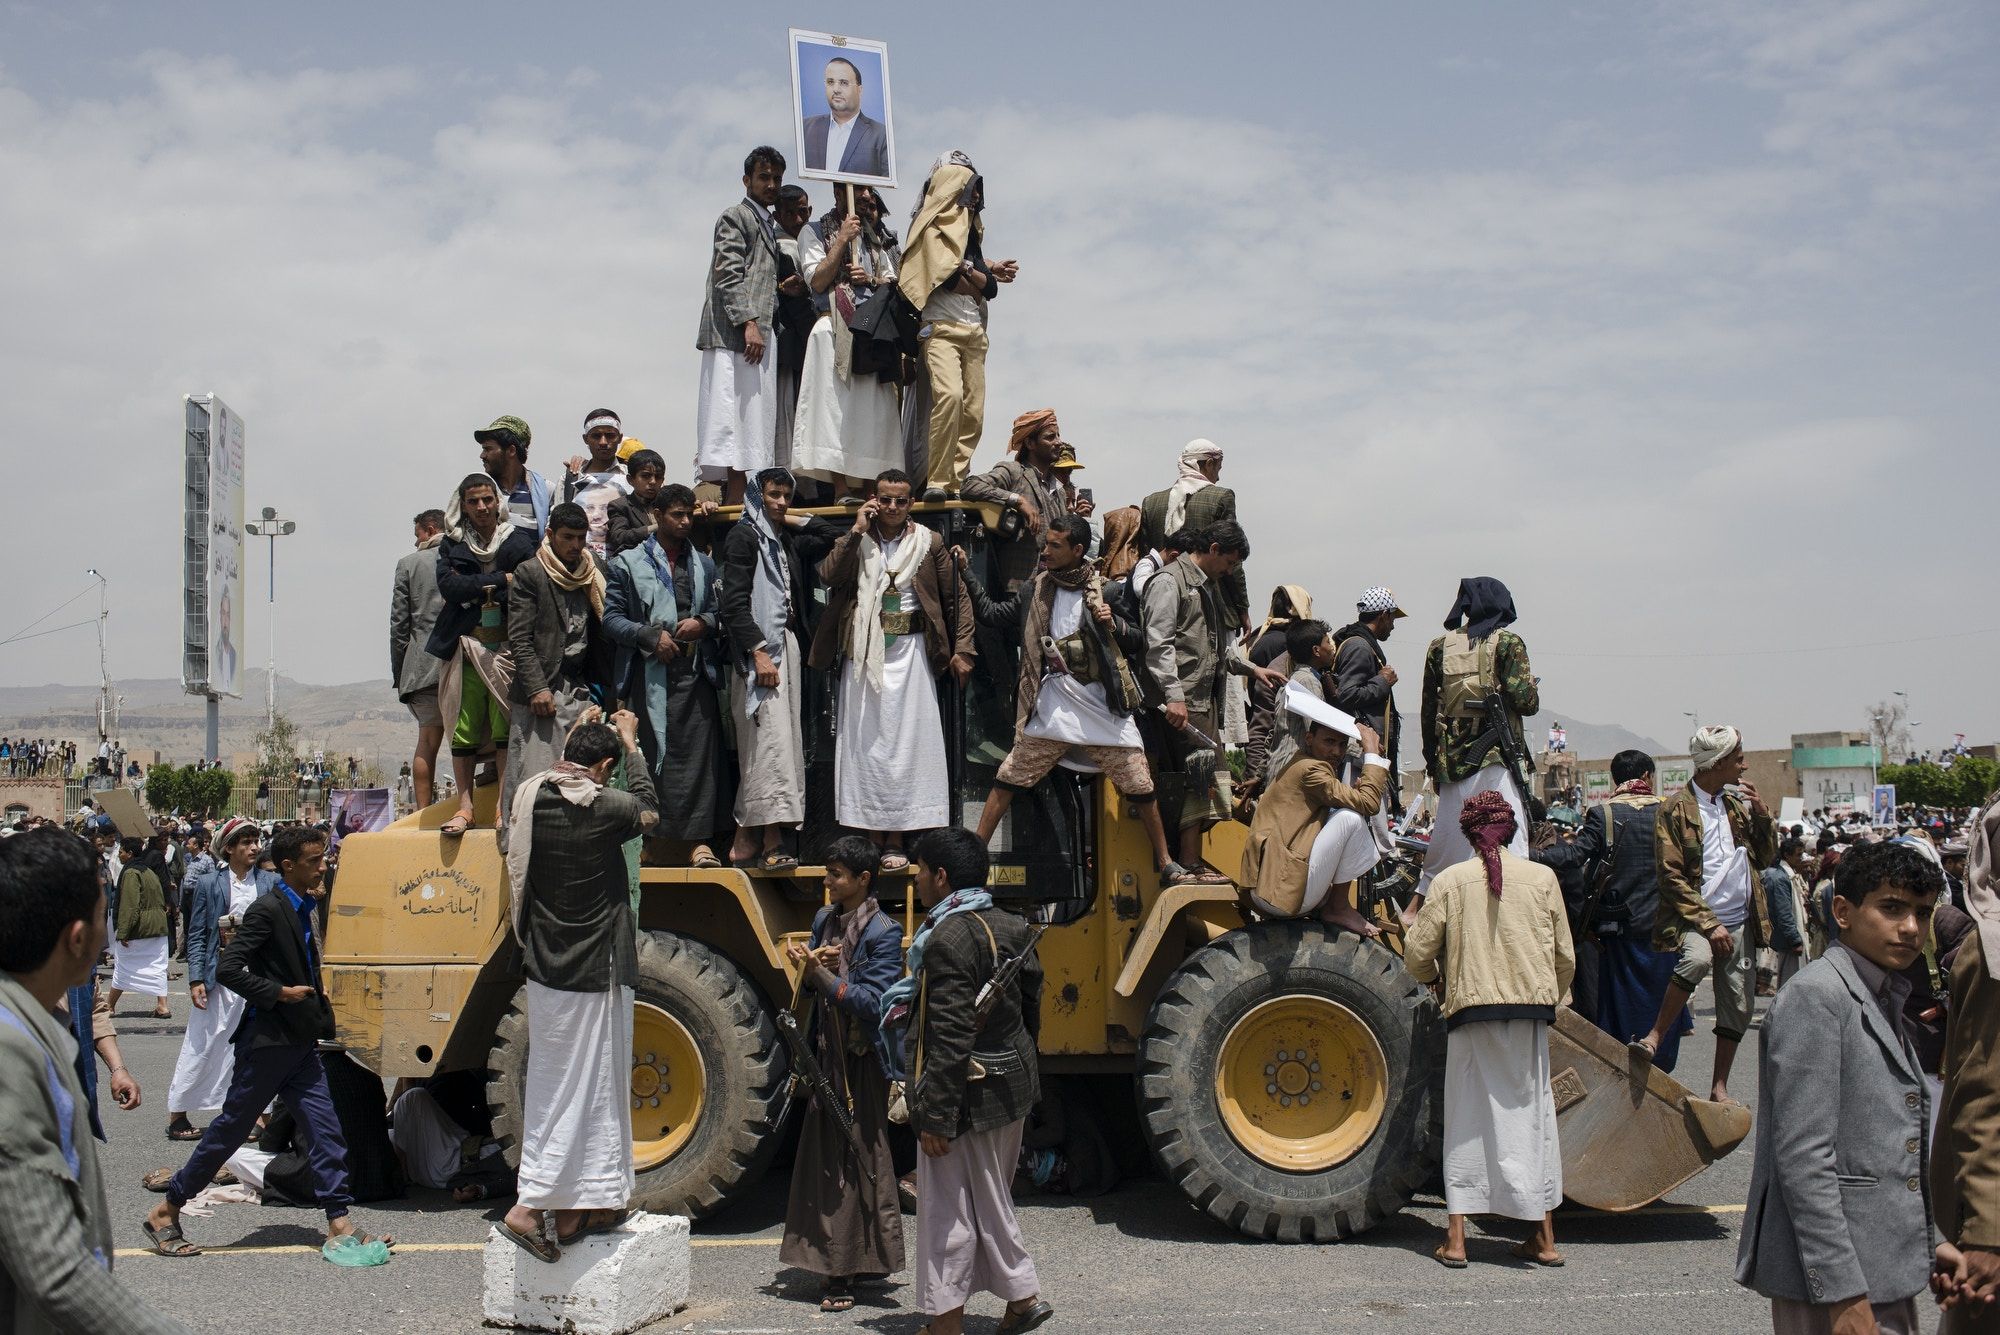 Supporters of the Houthis gather for prayer on April 28, 2018, ahead of the funeral of Saleh al-Samad, a Houthi political leader who was killed in an airstrike. Image by Alex Potter. Yemen, 2018. 